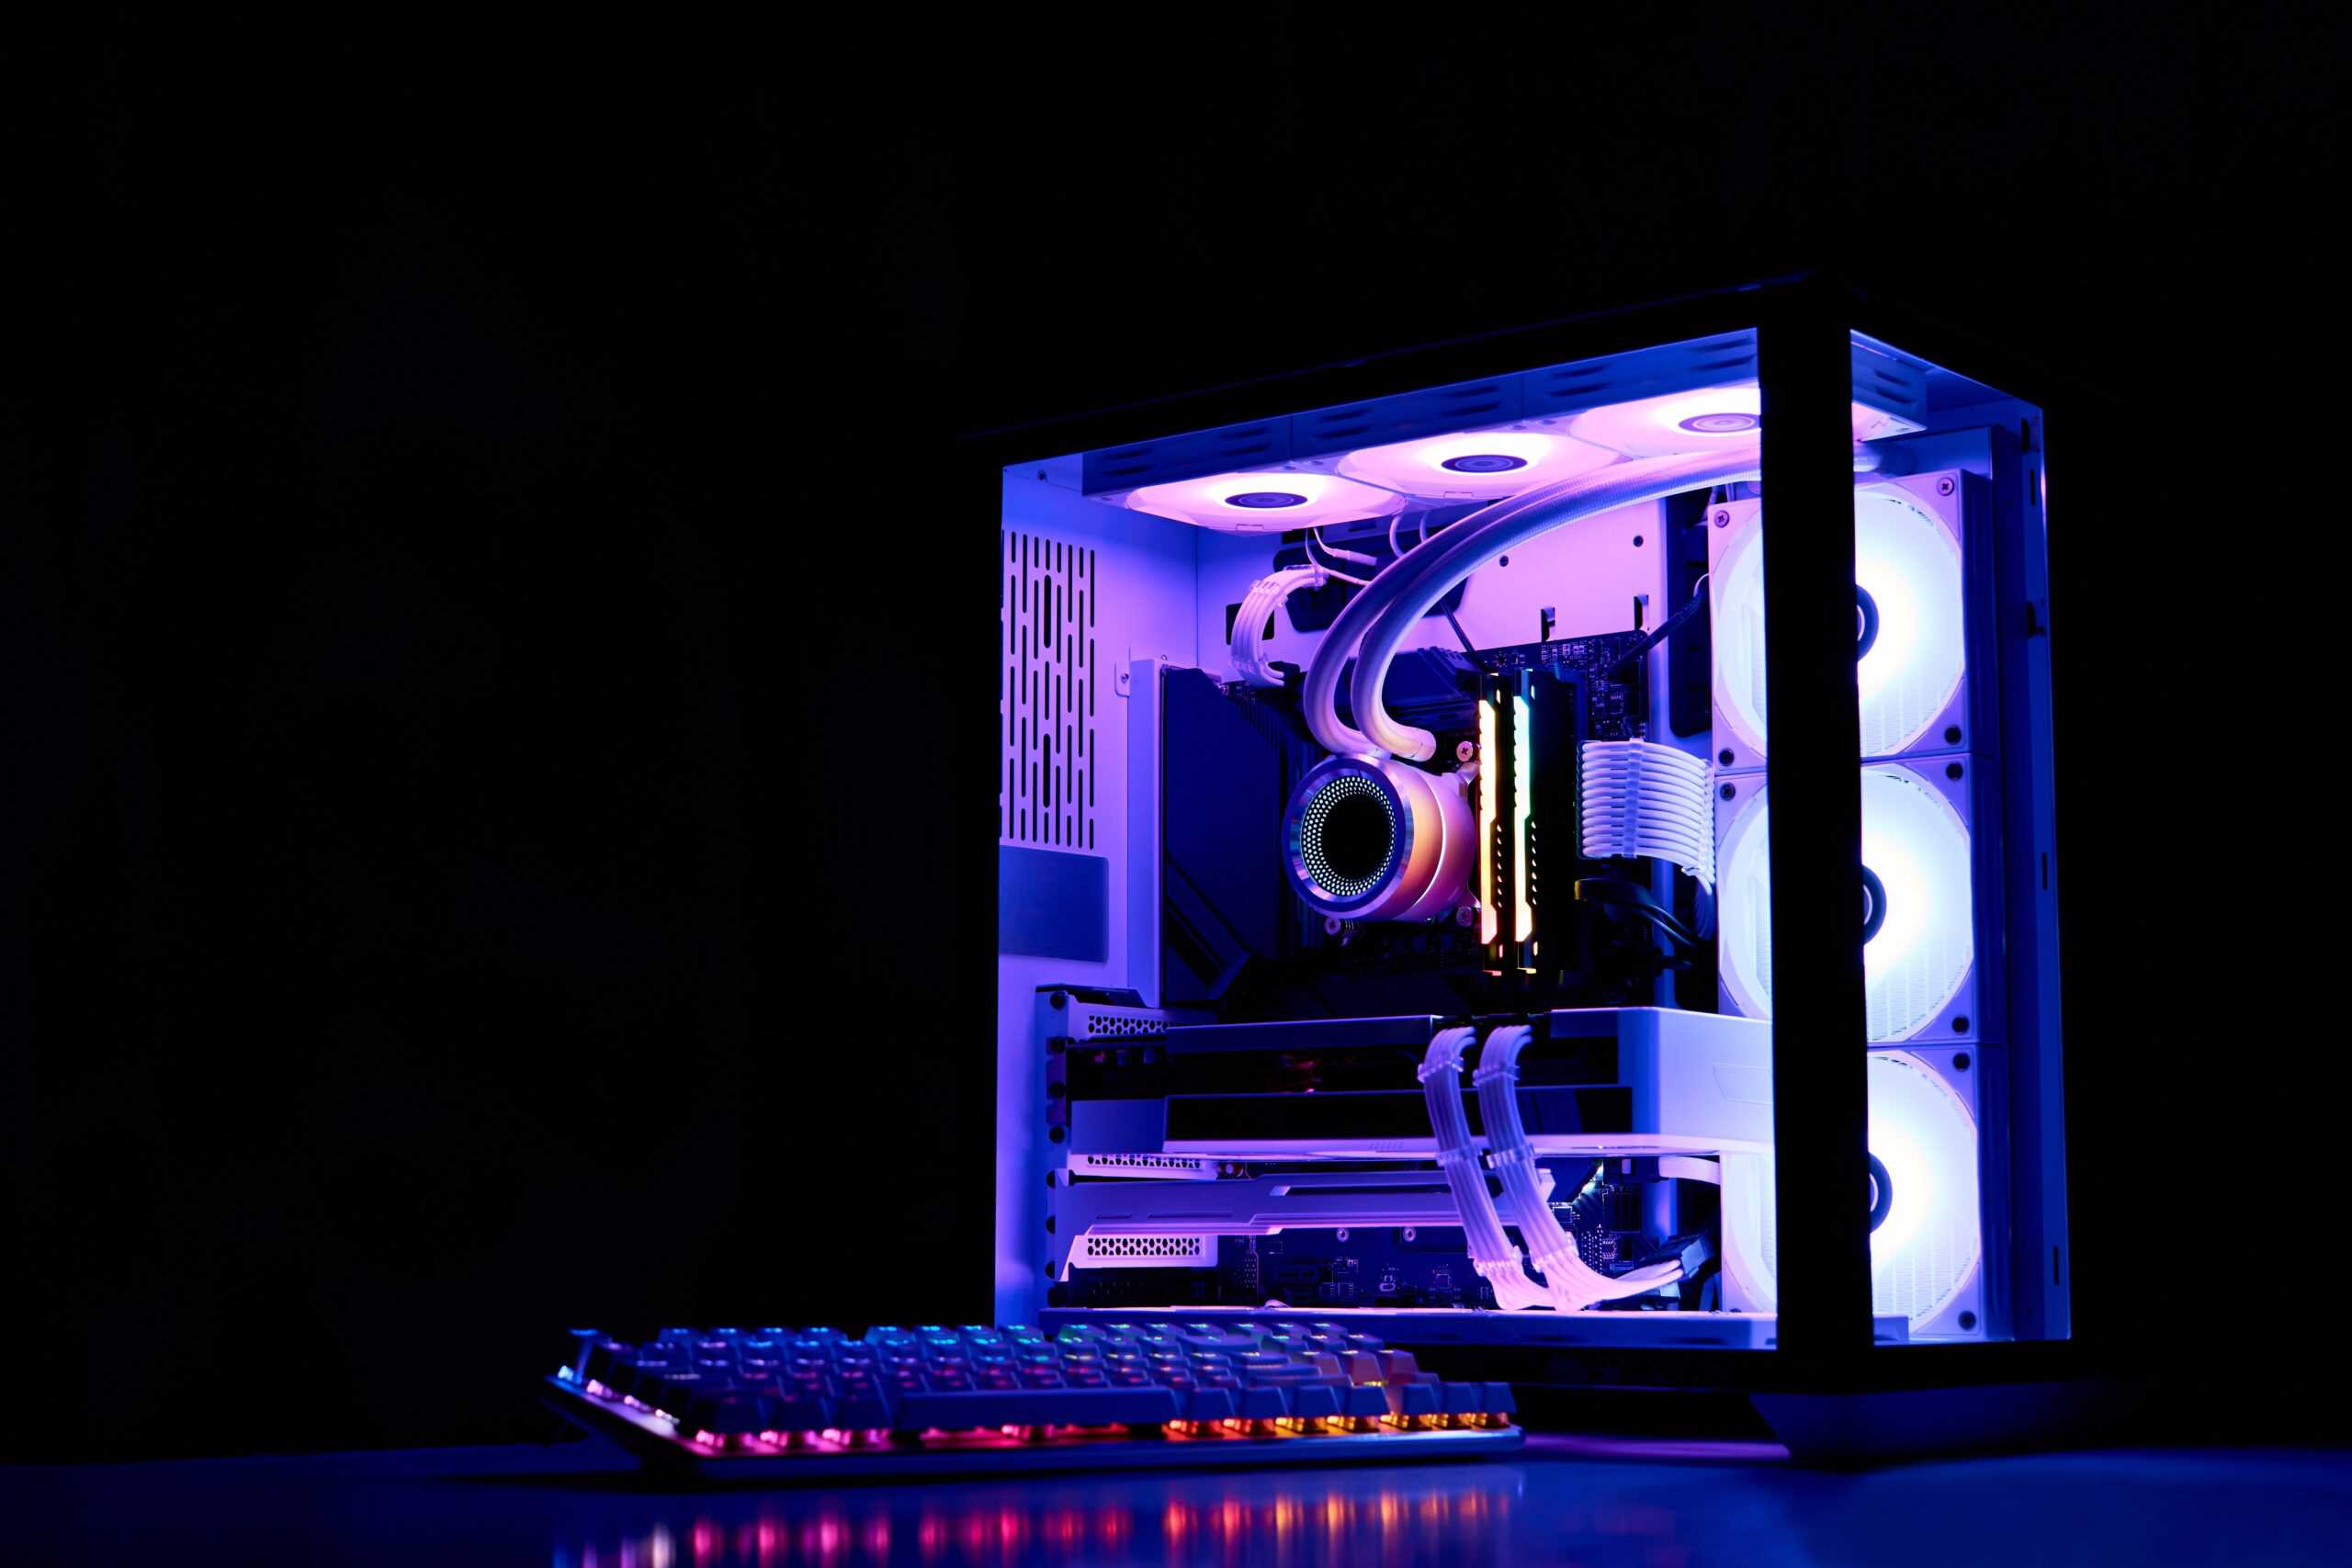 Gaming PC with rainbow LED light. Liquid cooled computer. Powerful PC in a glass case with keyboard. Gamer's workplace in a dark room, neon ligh